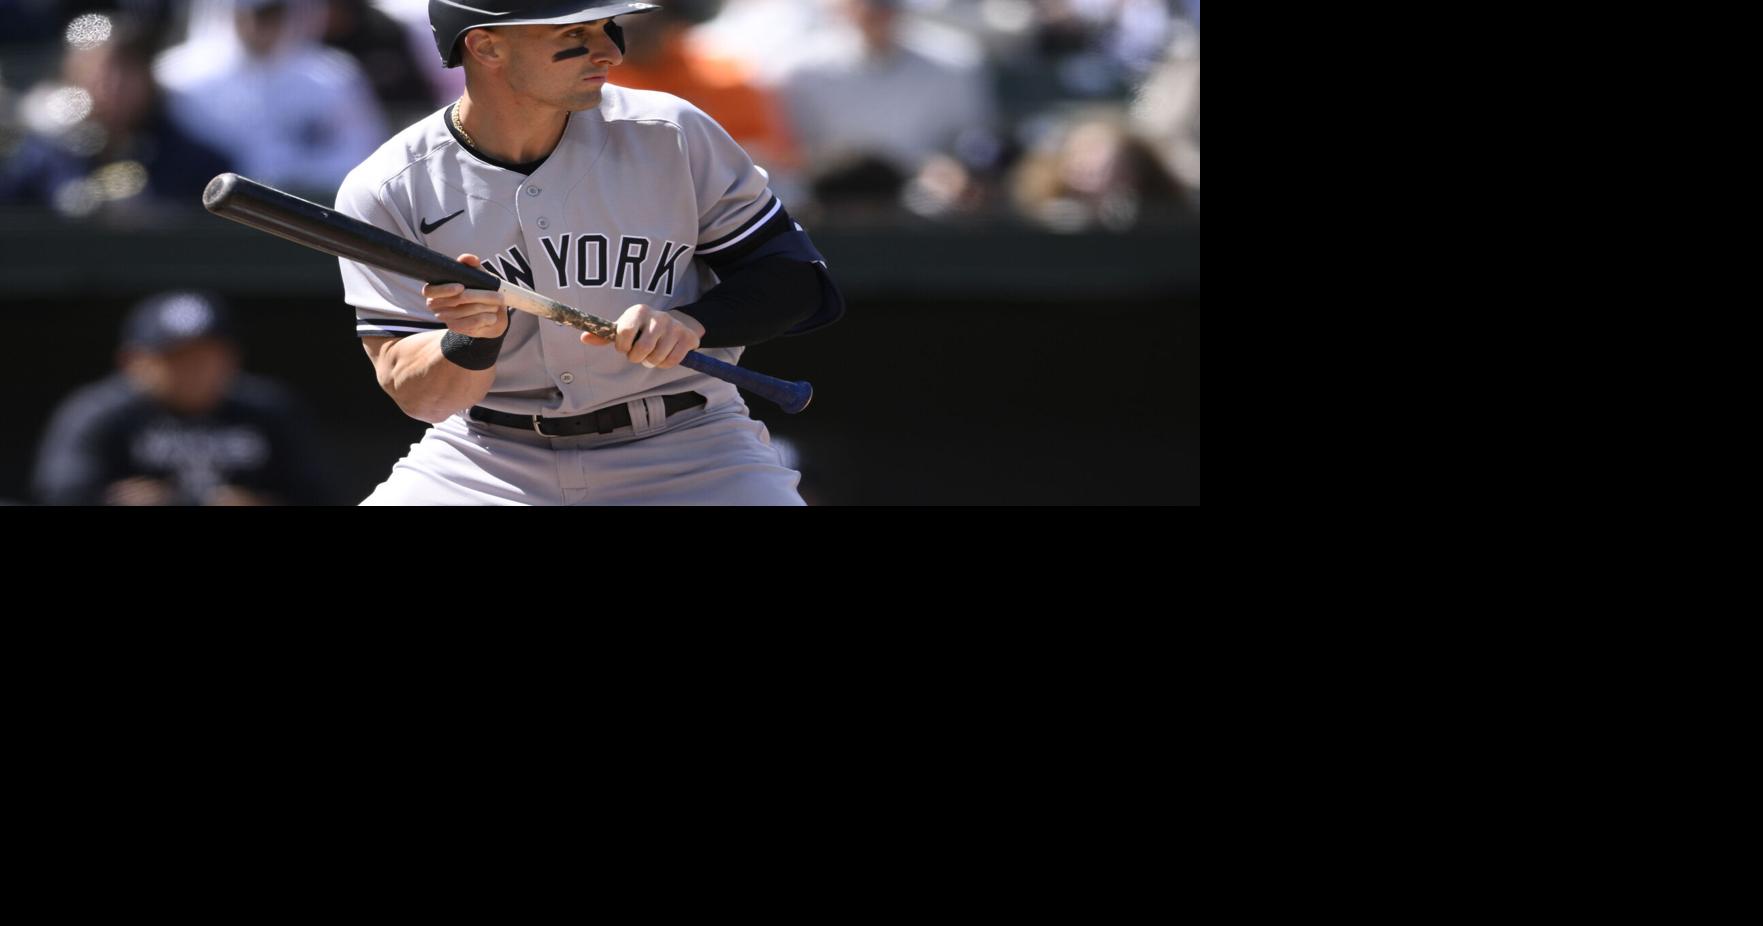 Auburn's Tim Locastro excited after trade to New York Yankees